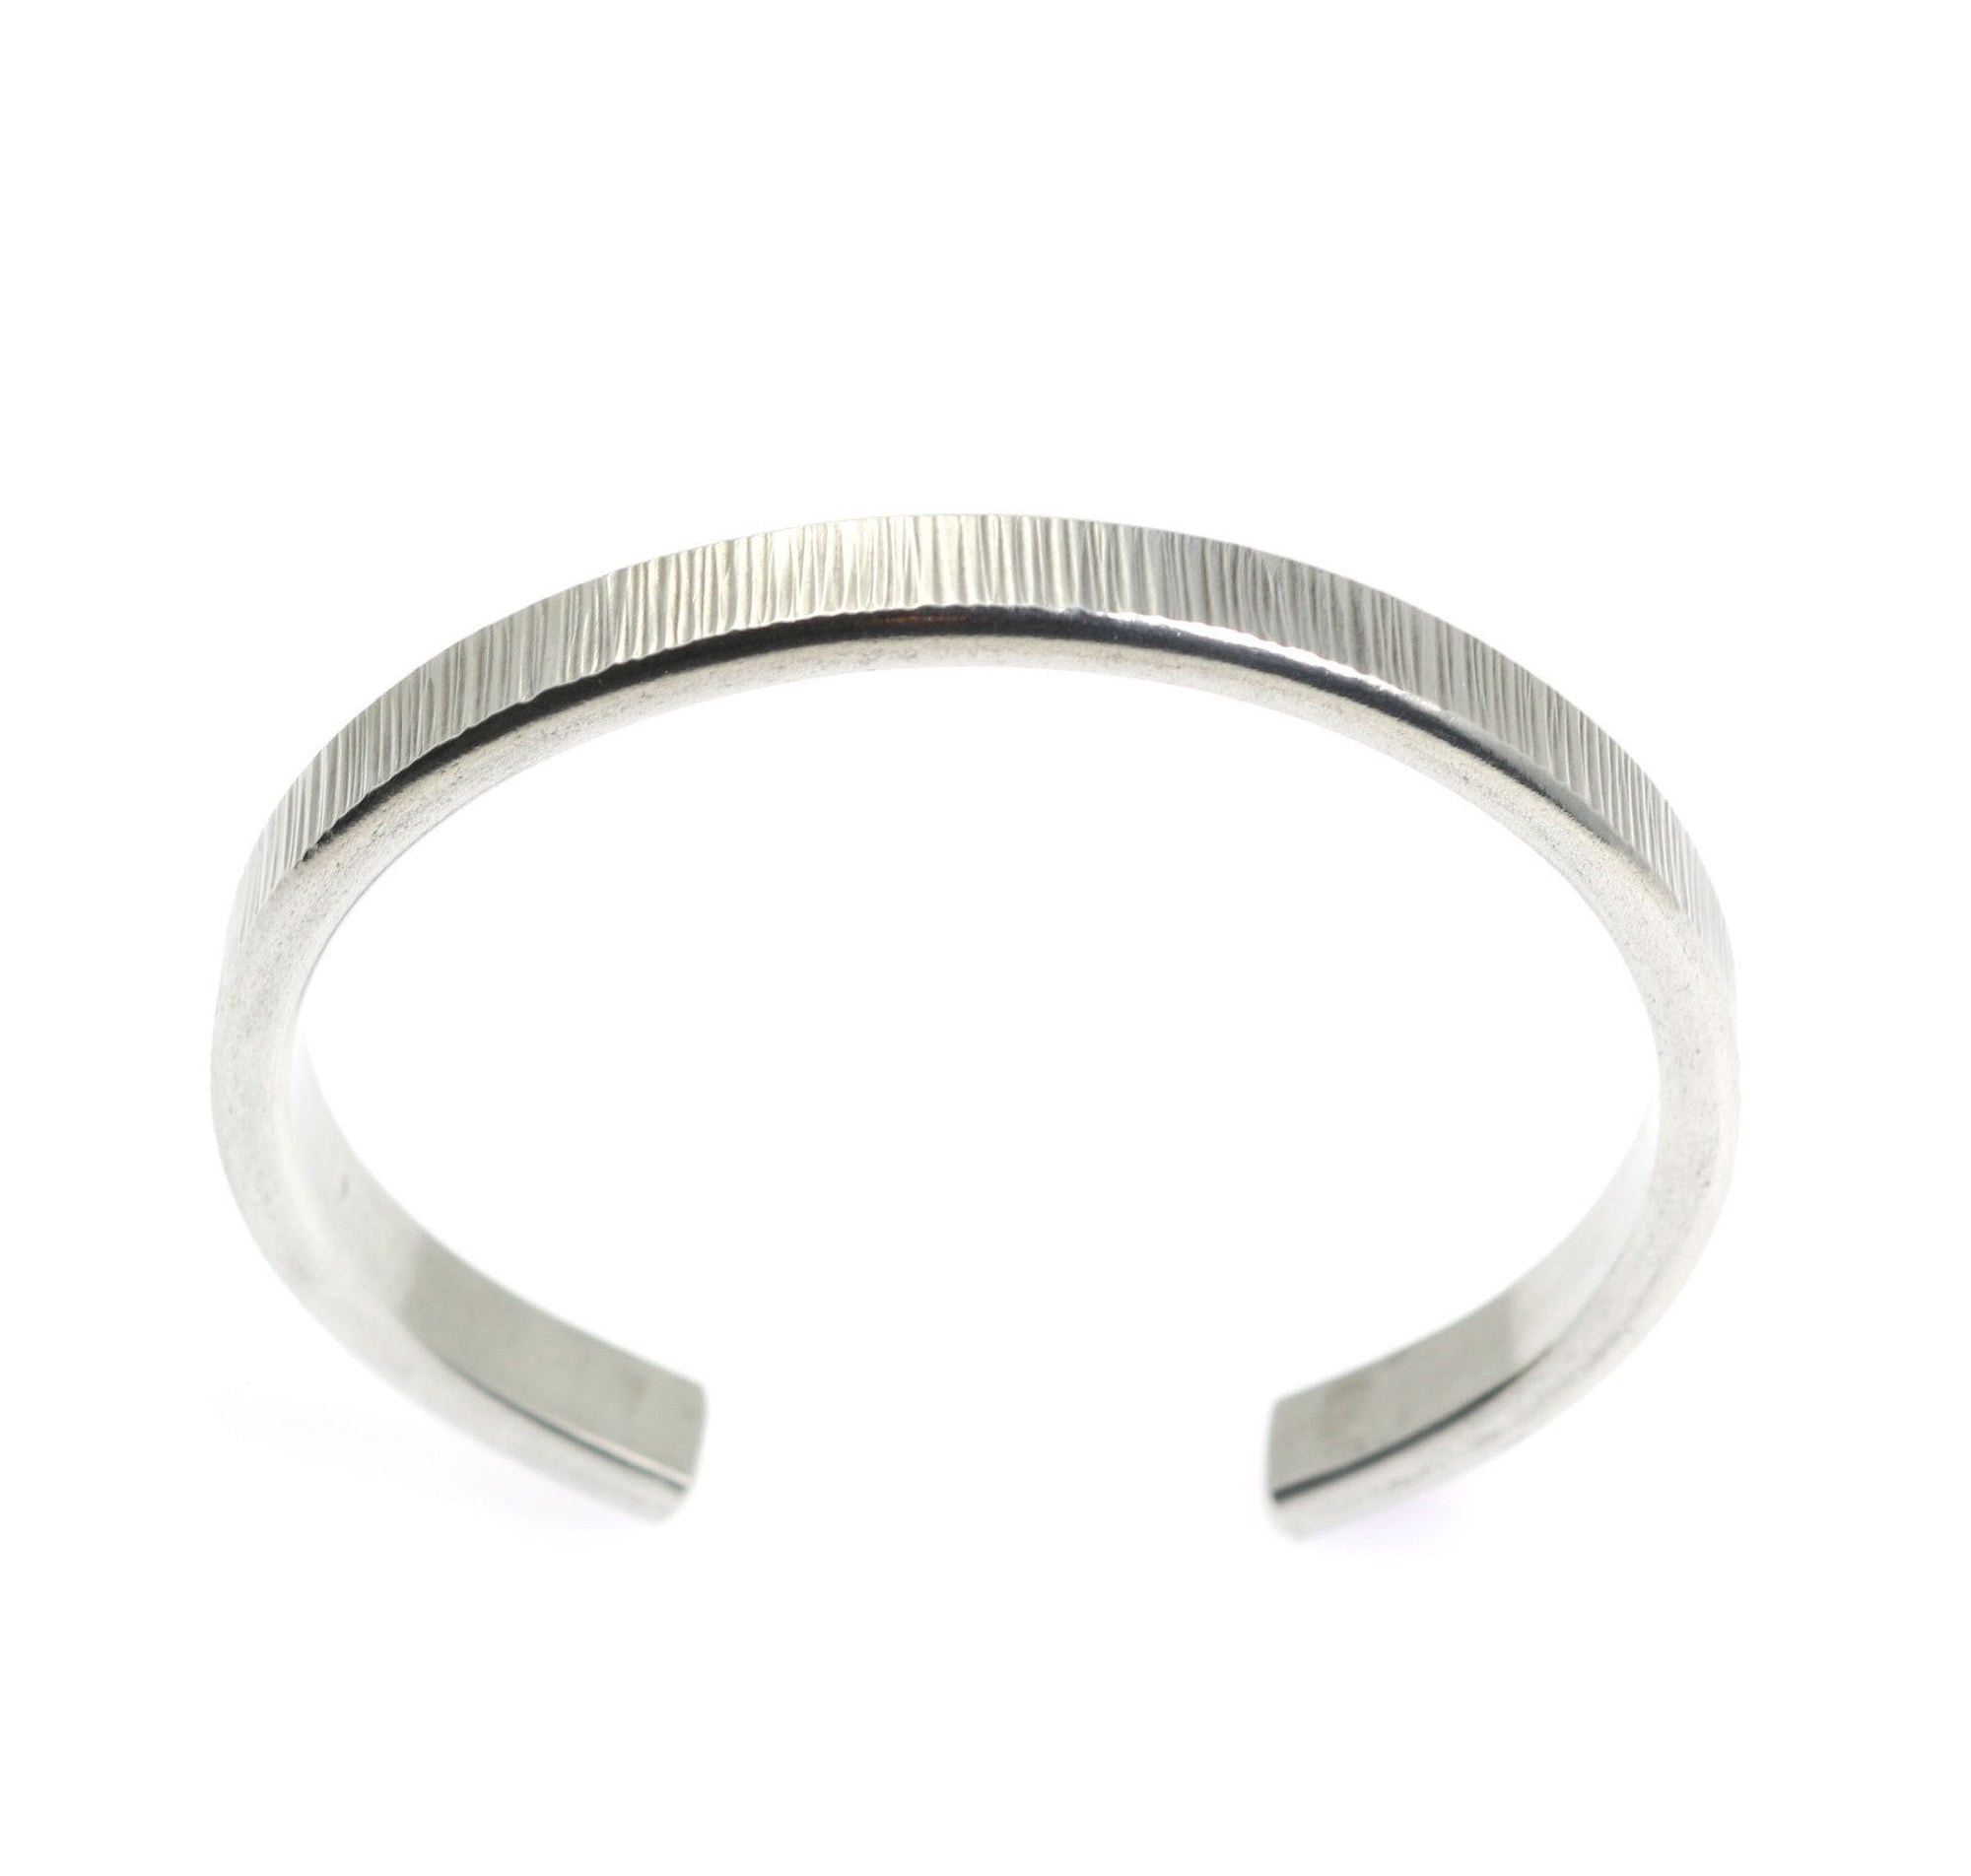 Top View of Thin Chased Aluminum Cuff Bracelet